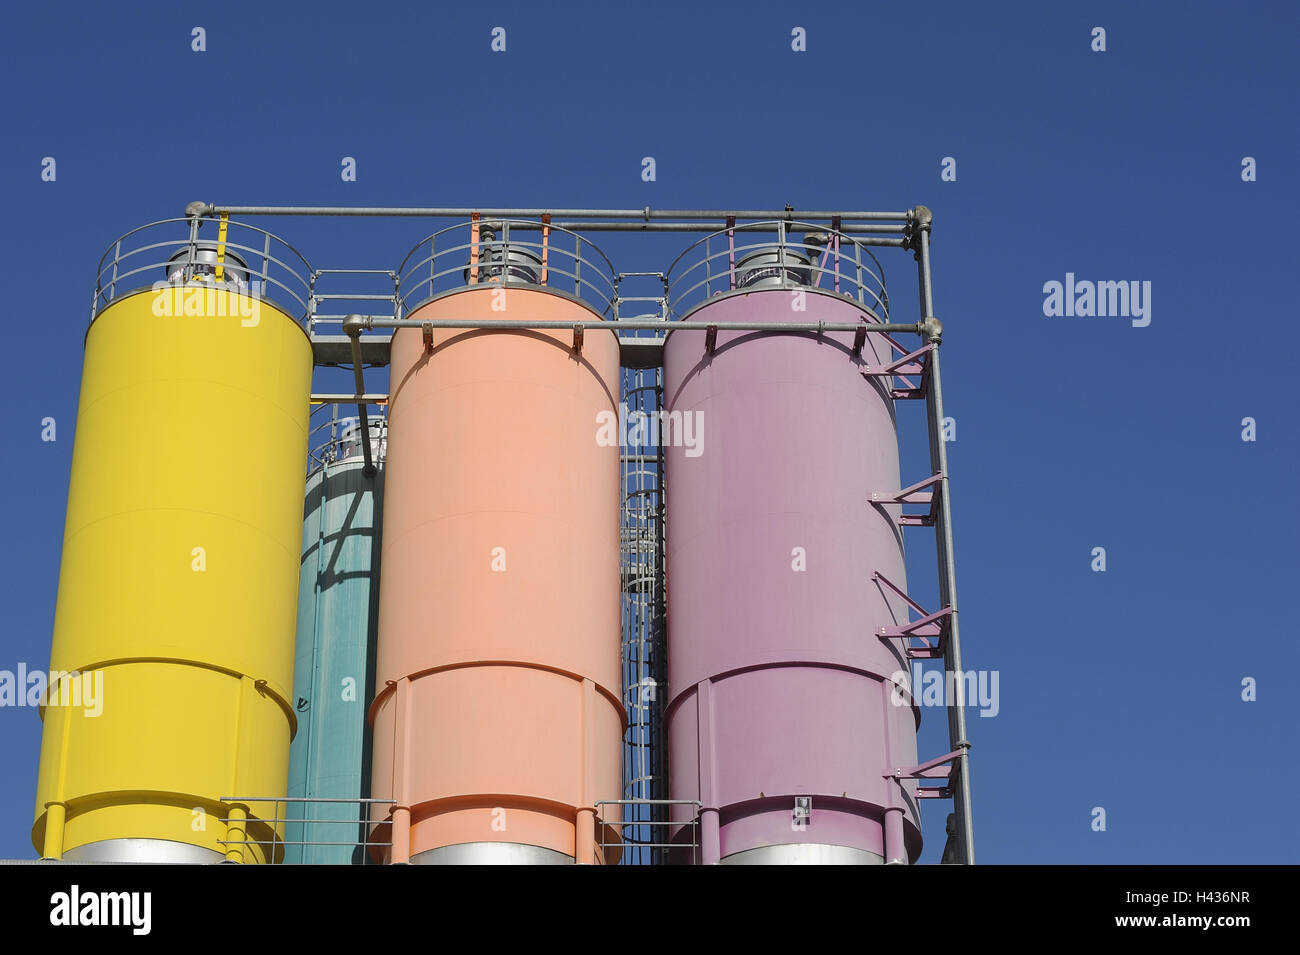 Silos, cases, supports, brightly, heaven, cloudless, blue, Stock Photo